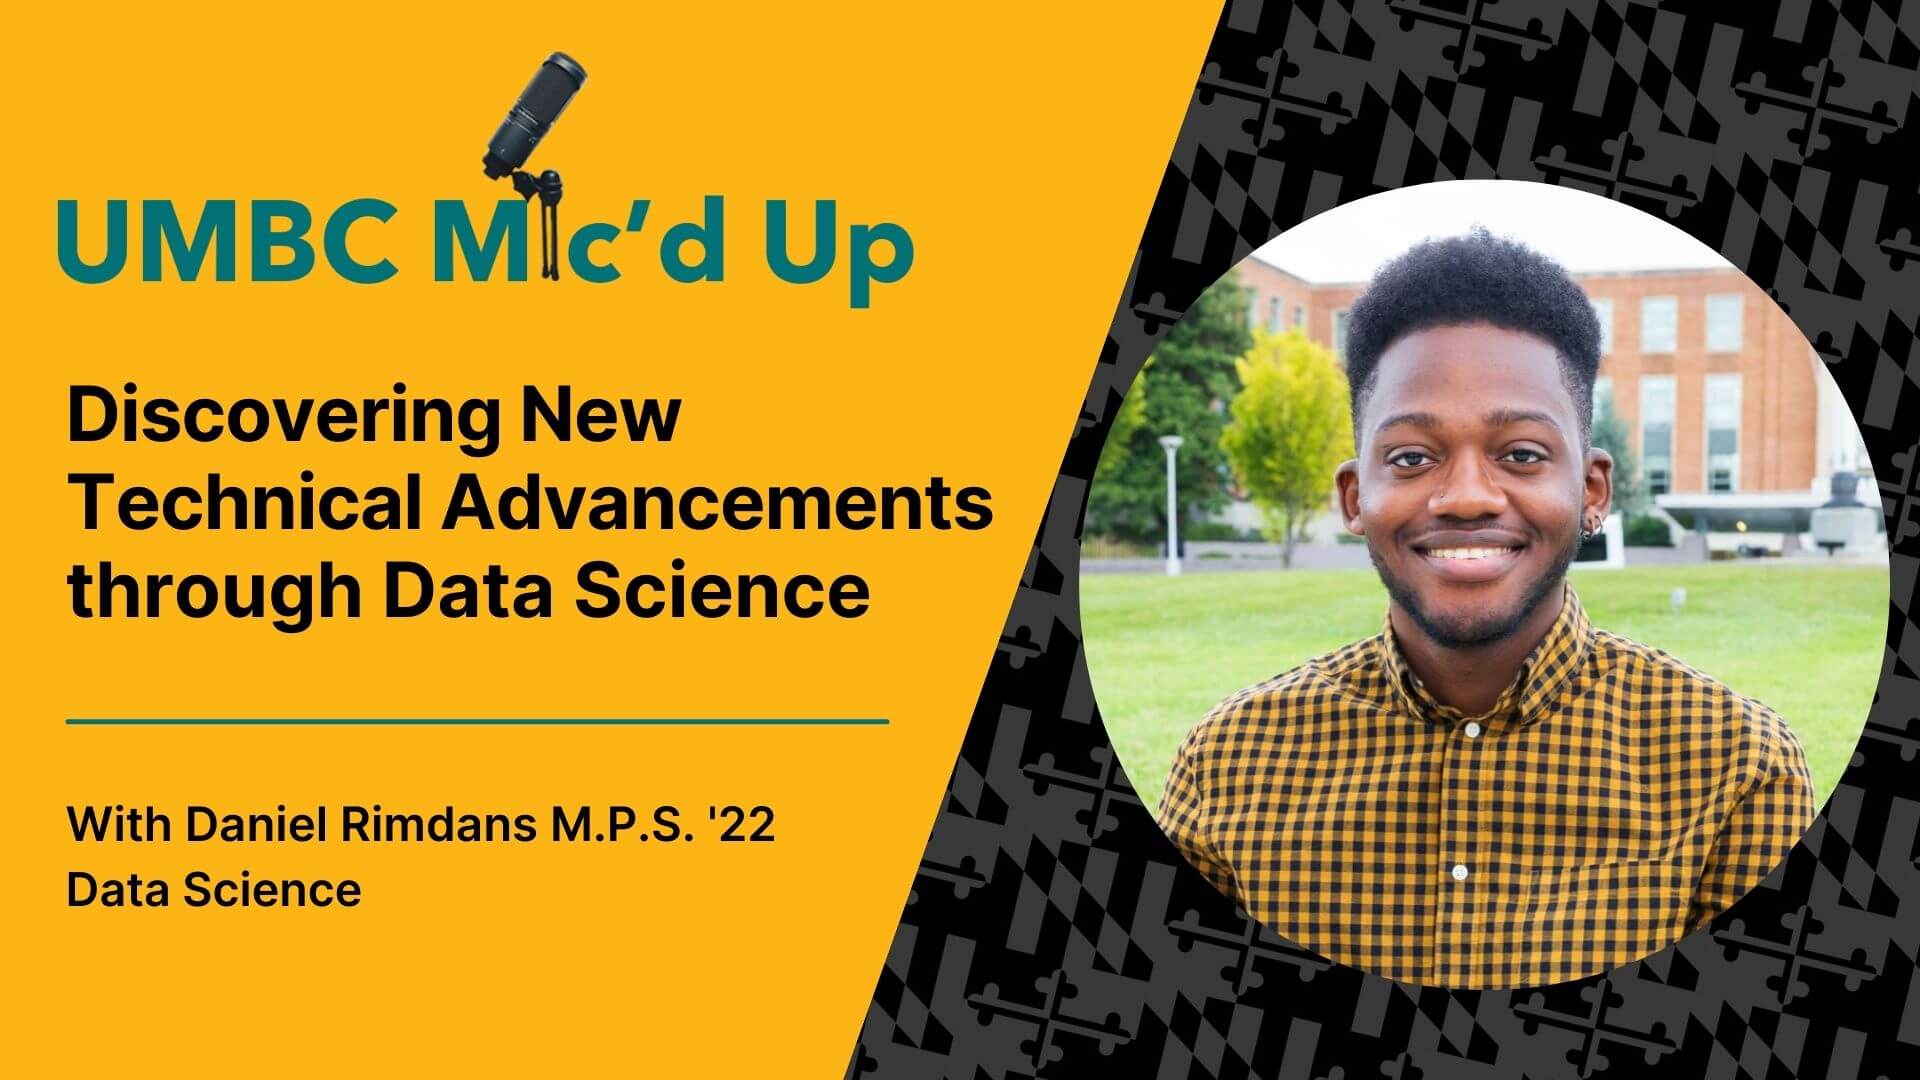 a UMBC graduate excelling in Data Science.